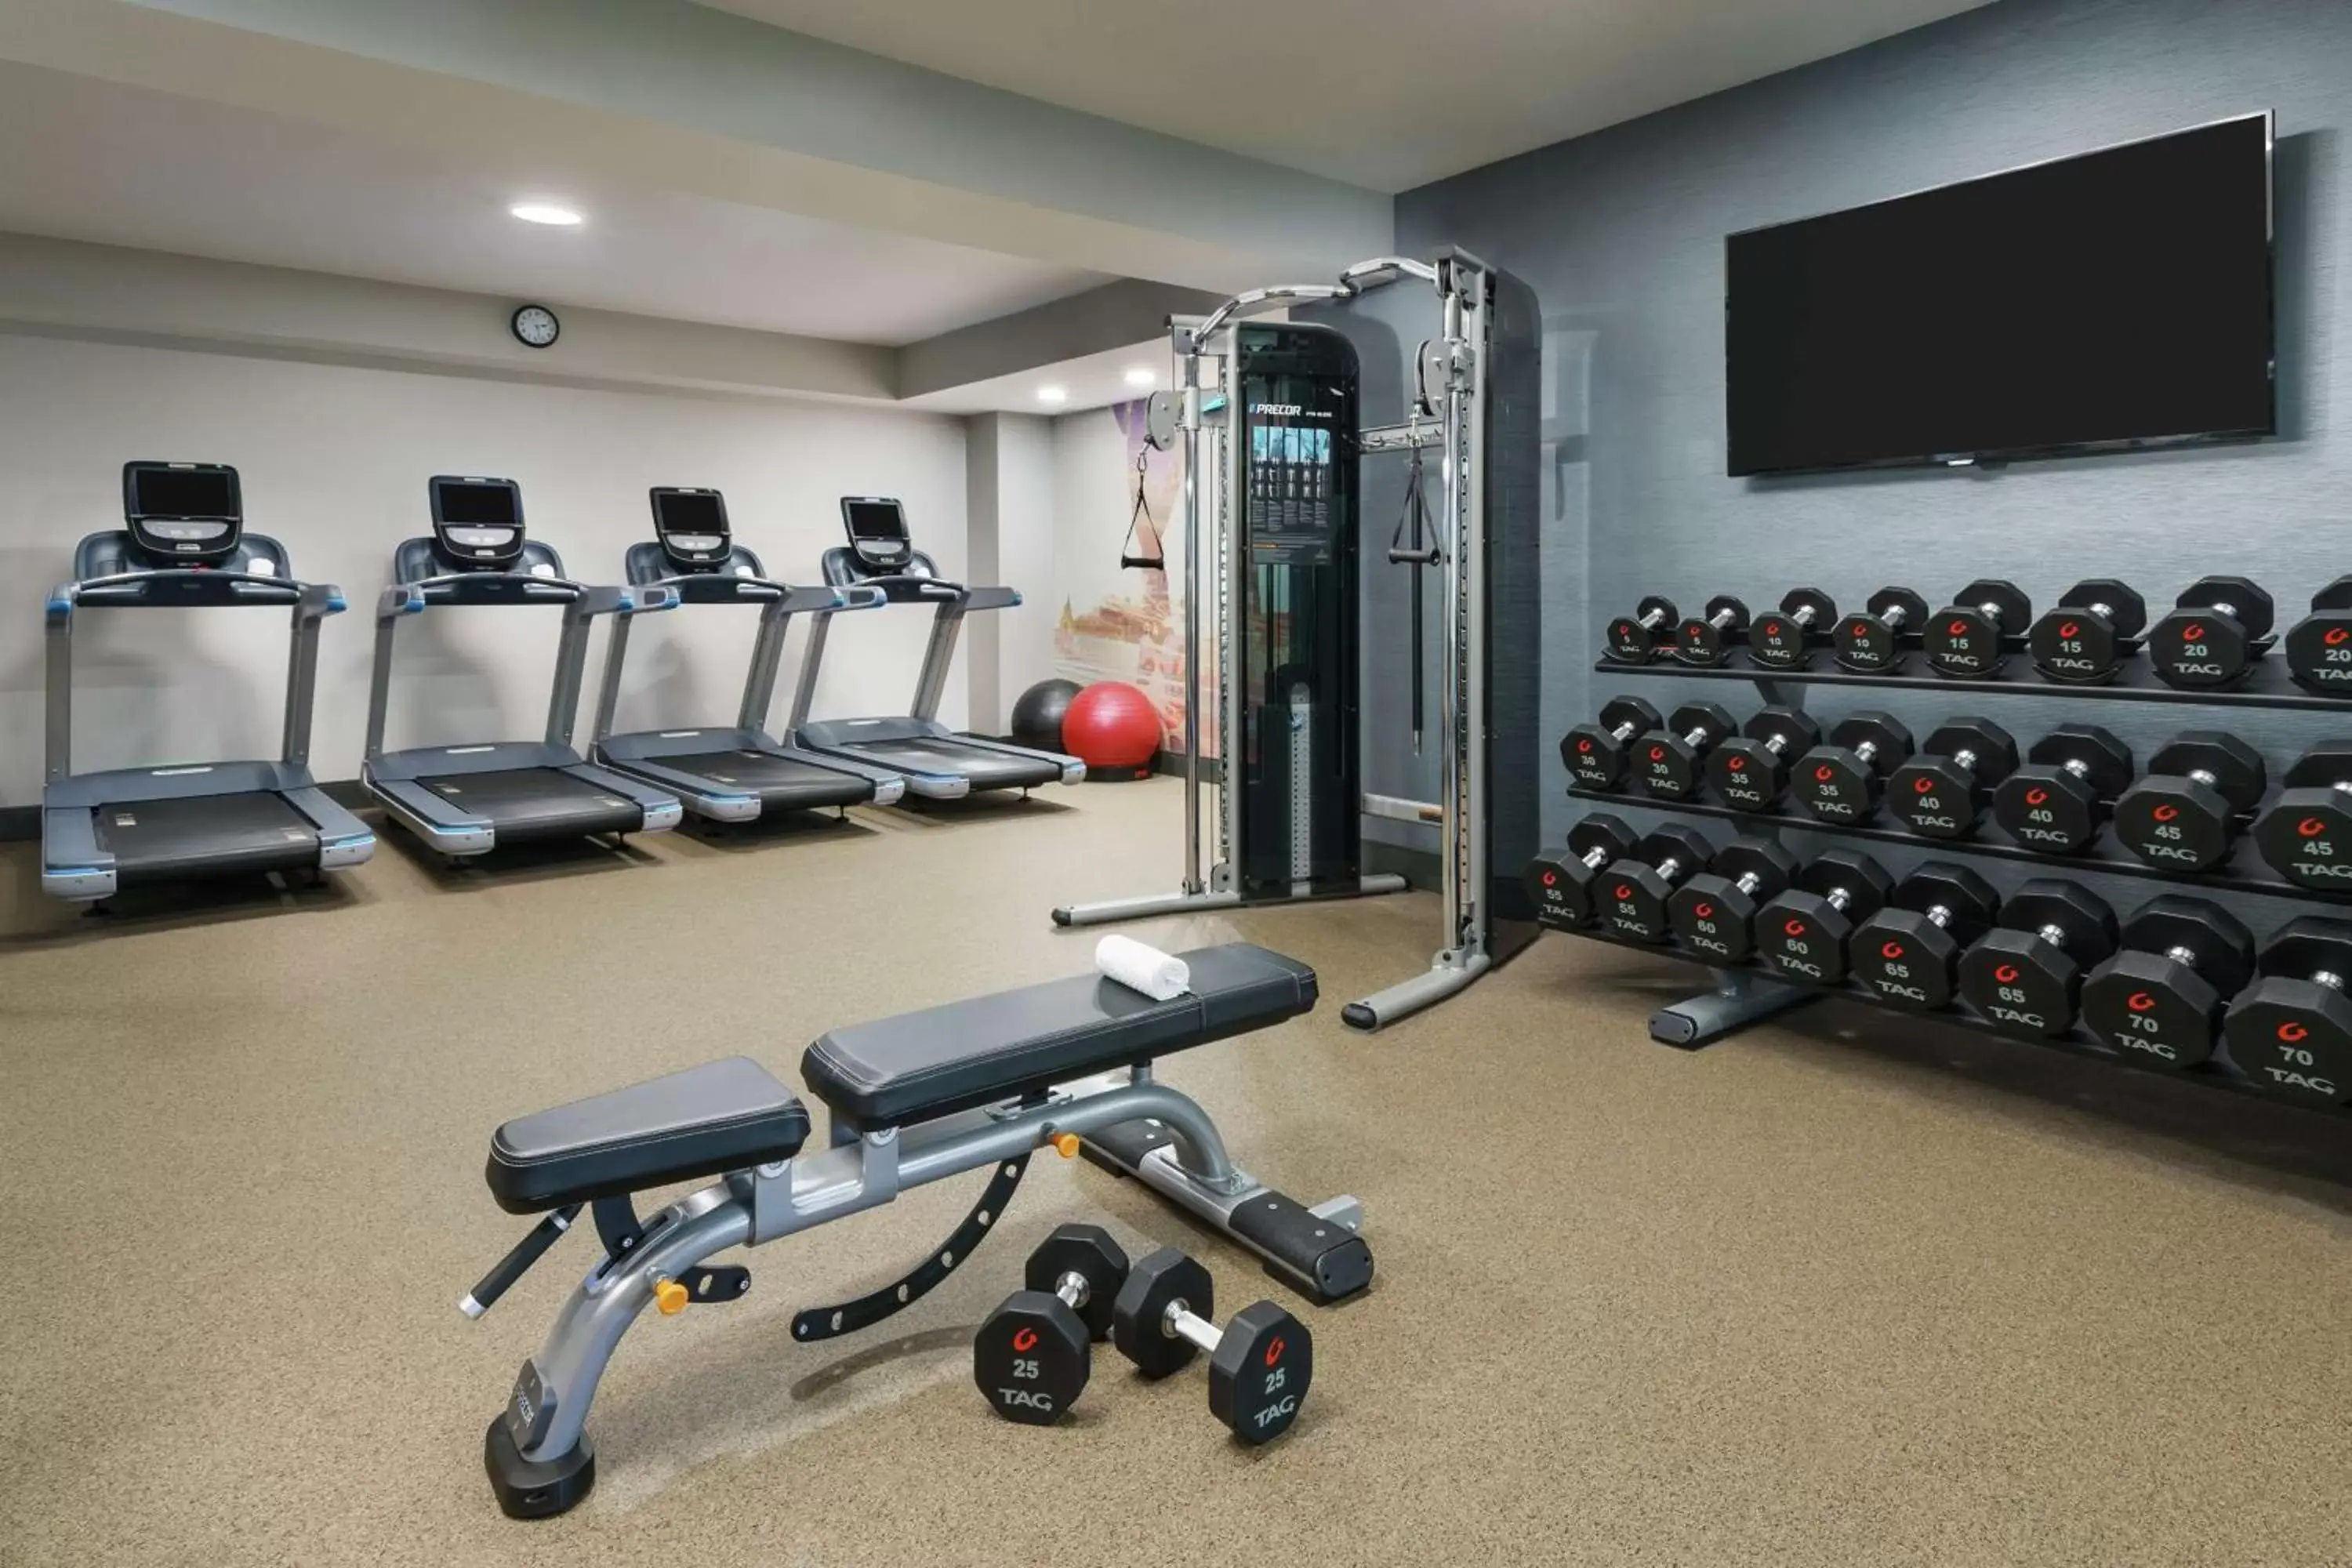 Fitness centre/facilities, Fitness Center/Facilities in DoubleTree by Hilton Orlando Airport Hotel